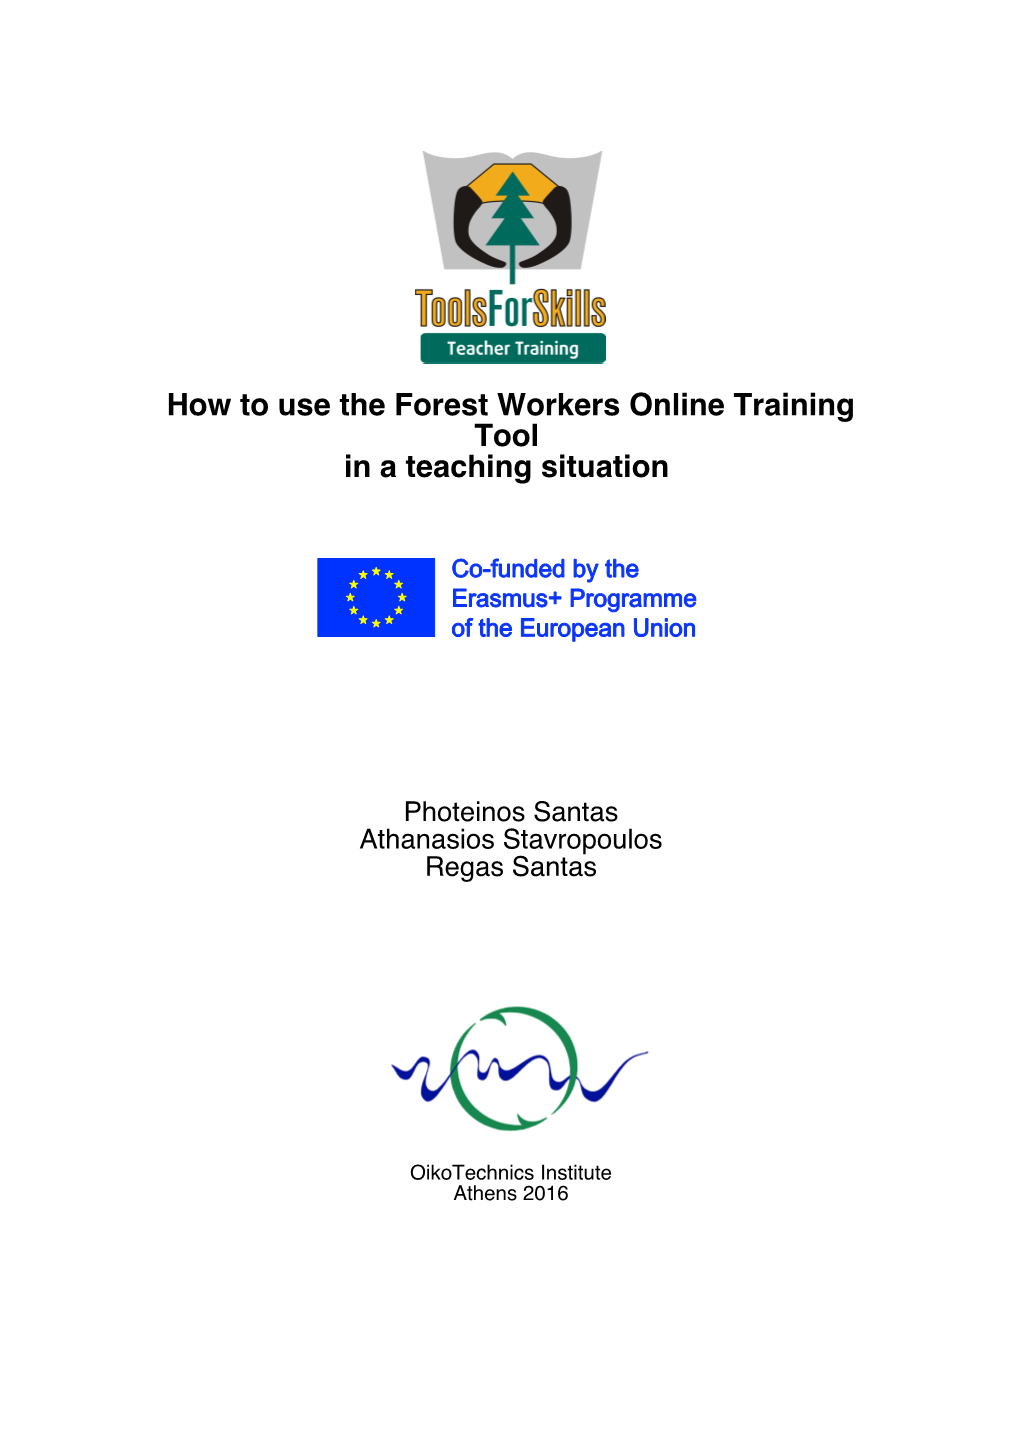 How to Use the Forest Workers Online Training Tool in a Teaching Situation